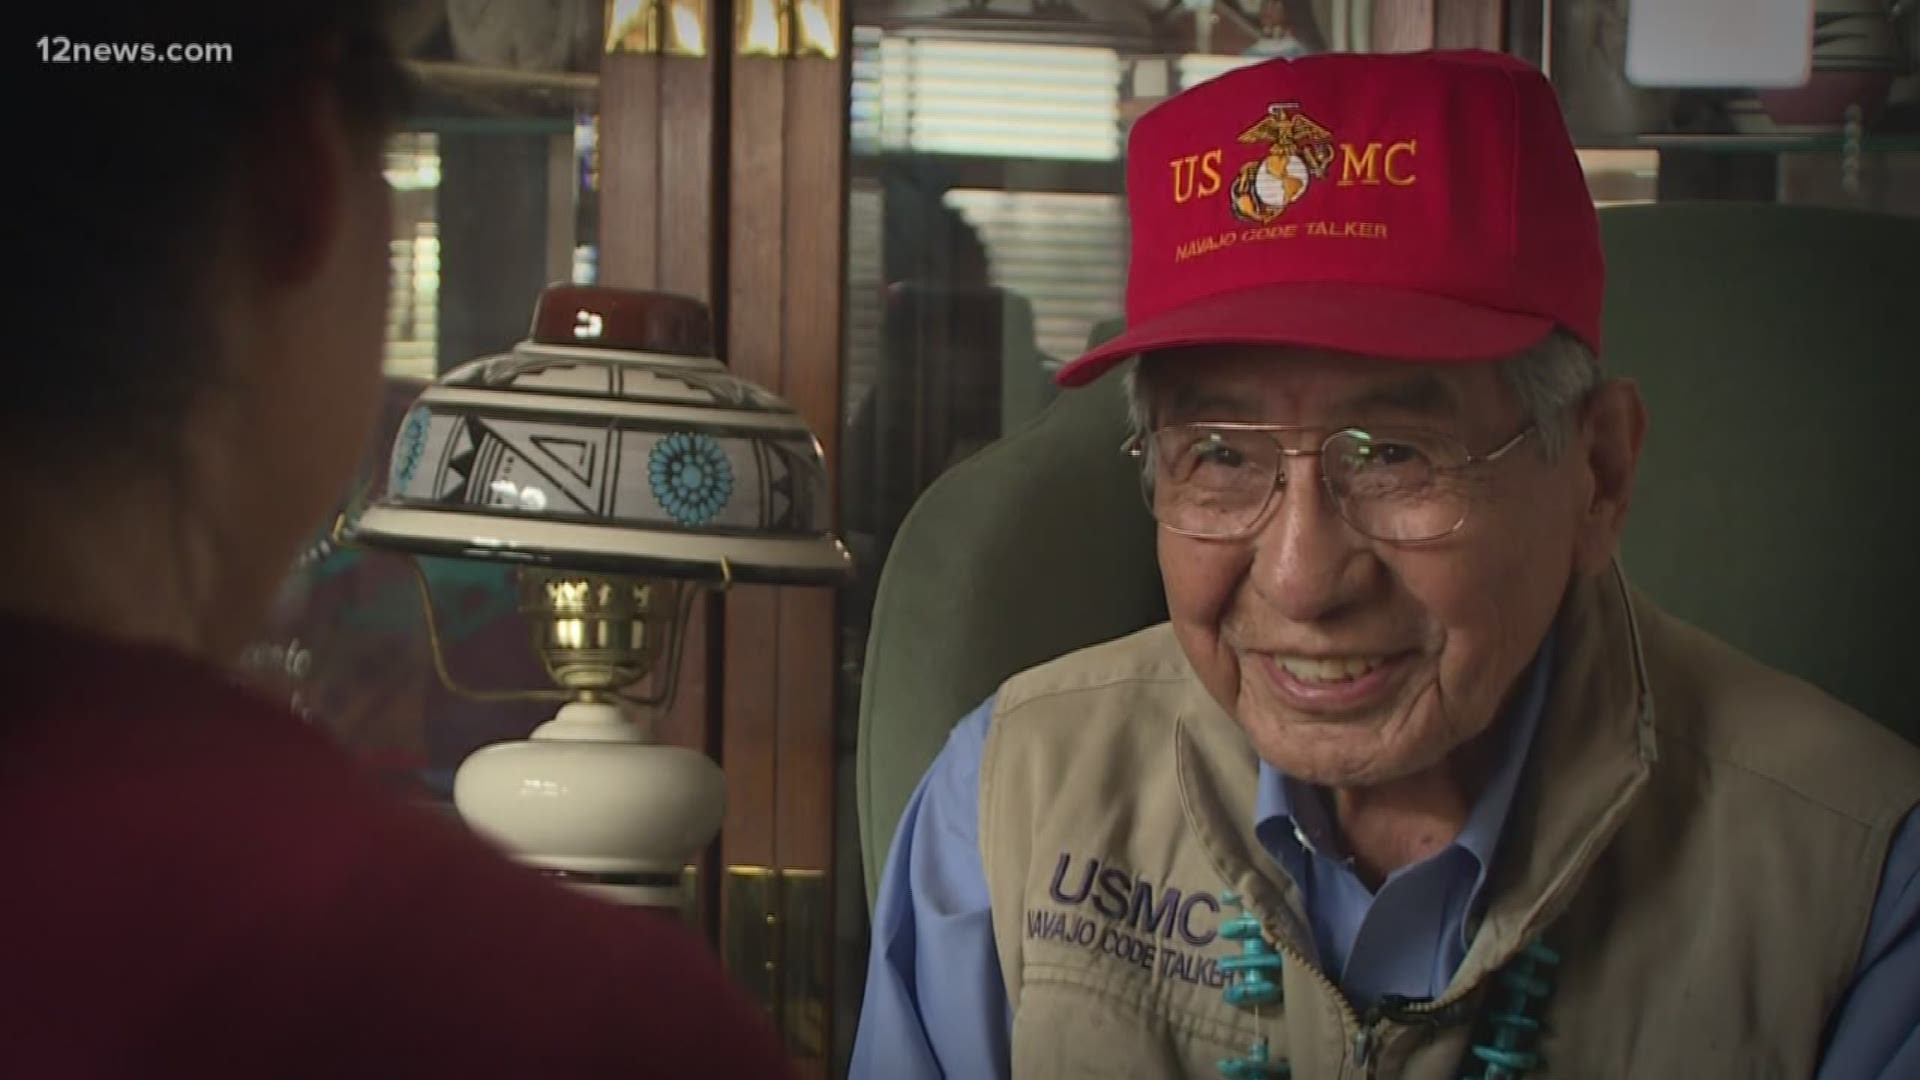 August 14th is National Code Talkers Day. 12 News speaks to one of the remaining few Code Talkers about his experience in WWII and his memories of the code that the enemy couldn't crack.